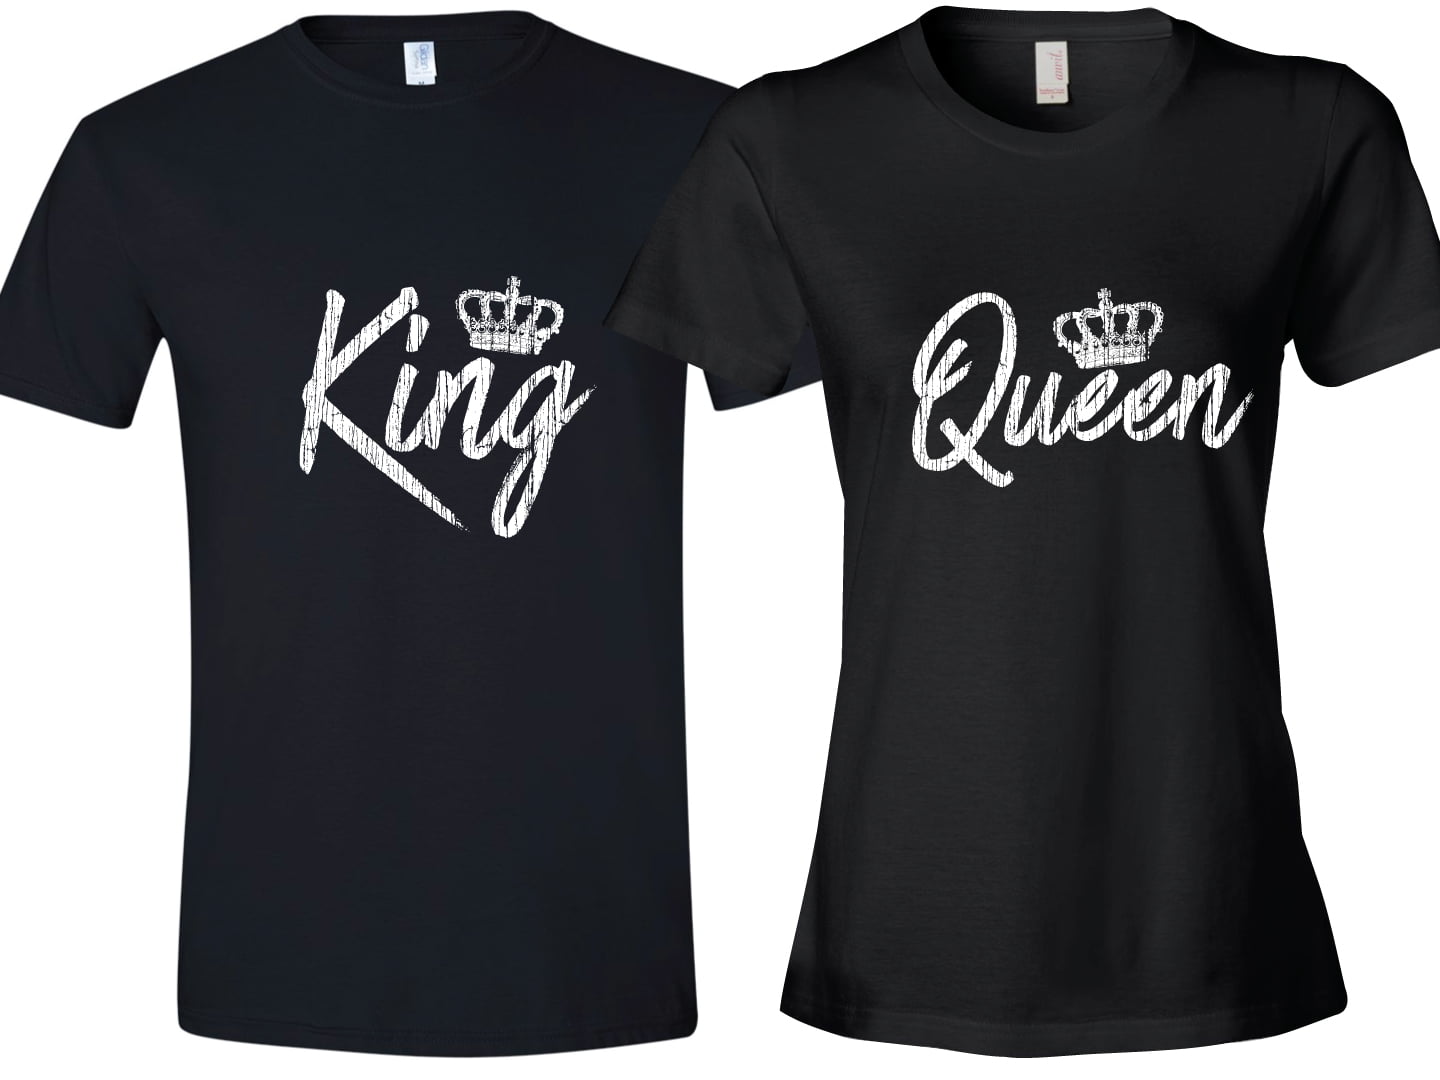 Honeymoon King & Queen Couples Matching T-Shirt Funny Unisex Father's Day Teens Shirt Graphic Tees TShirt